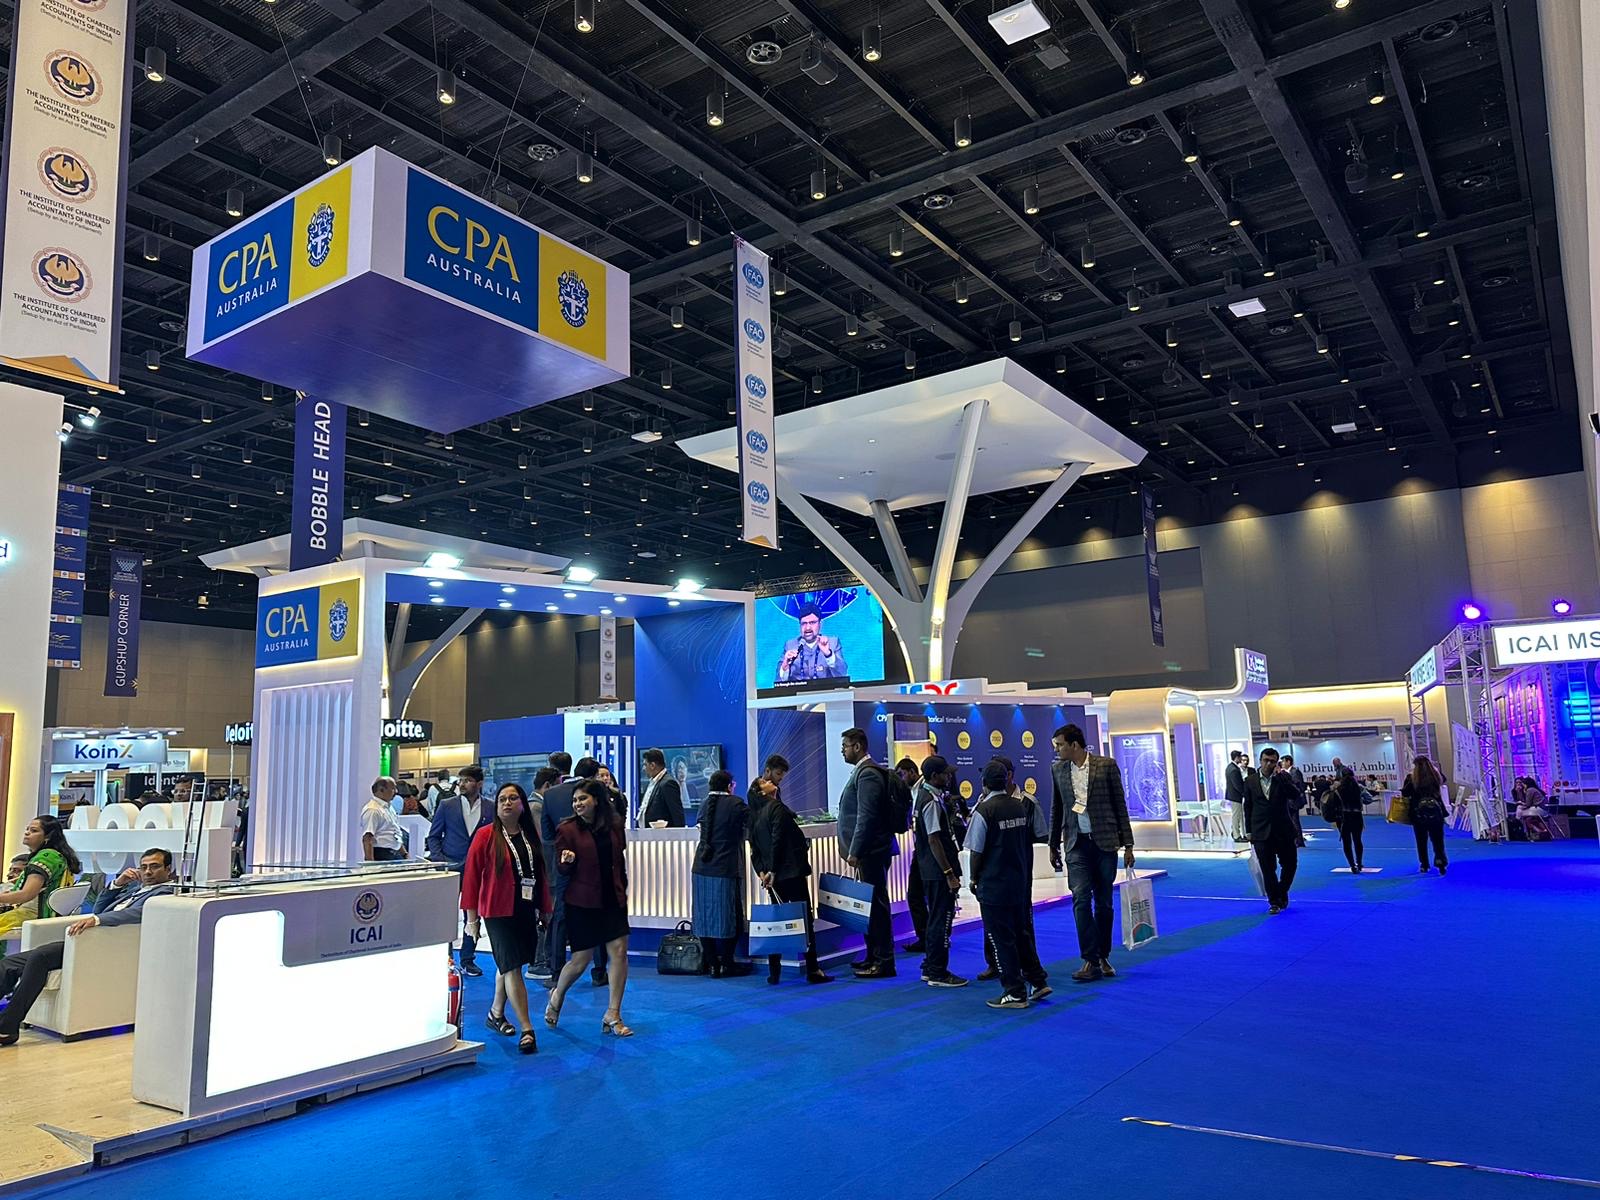 CPA Australia booth in the Exhibition Hall at WCOA 2022